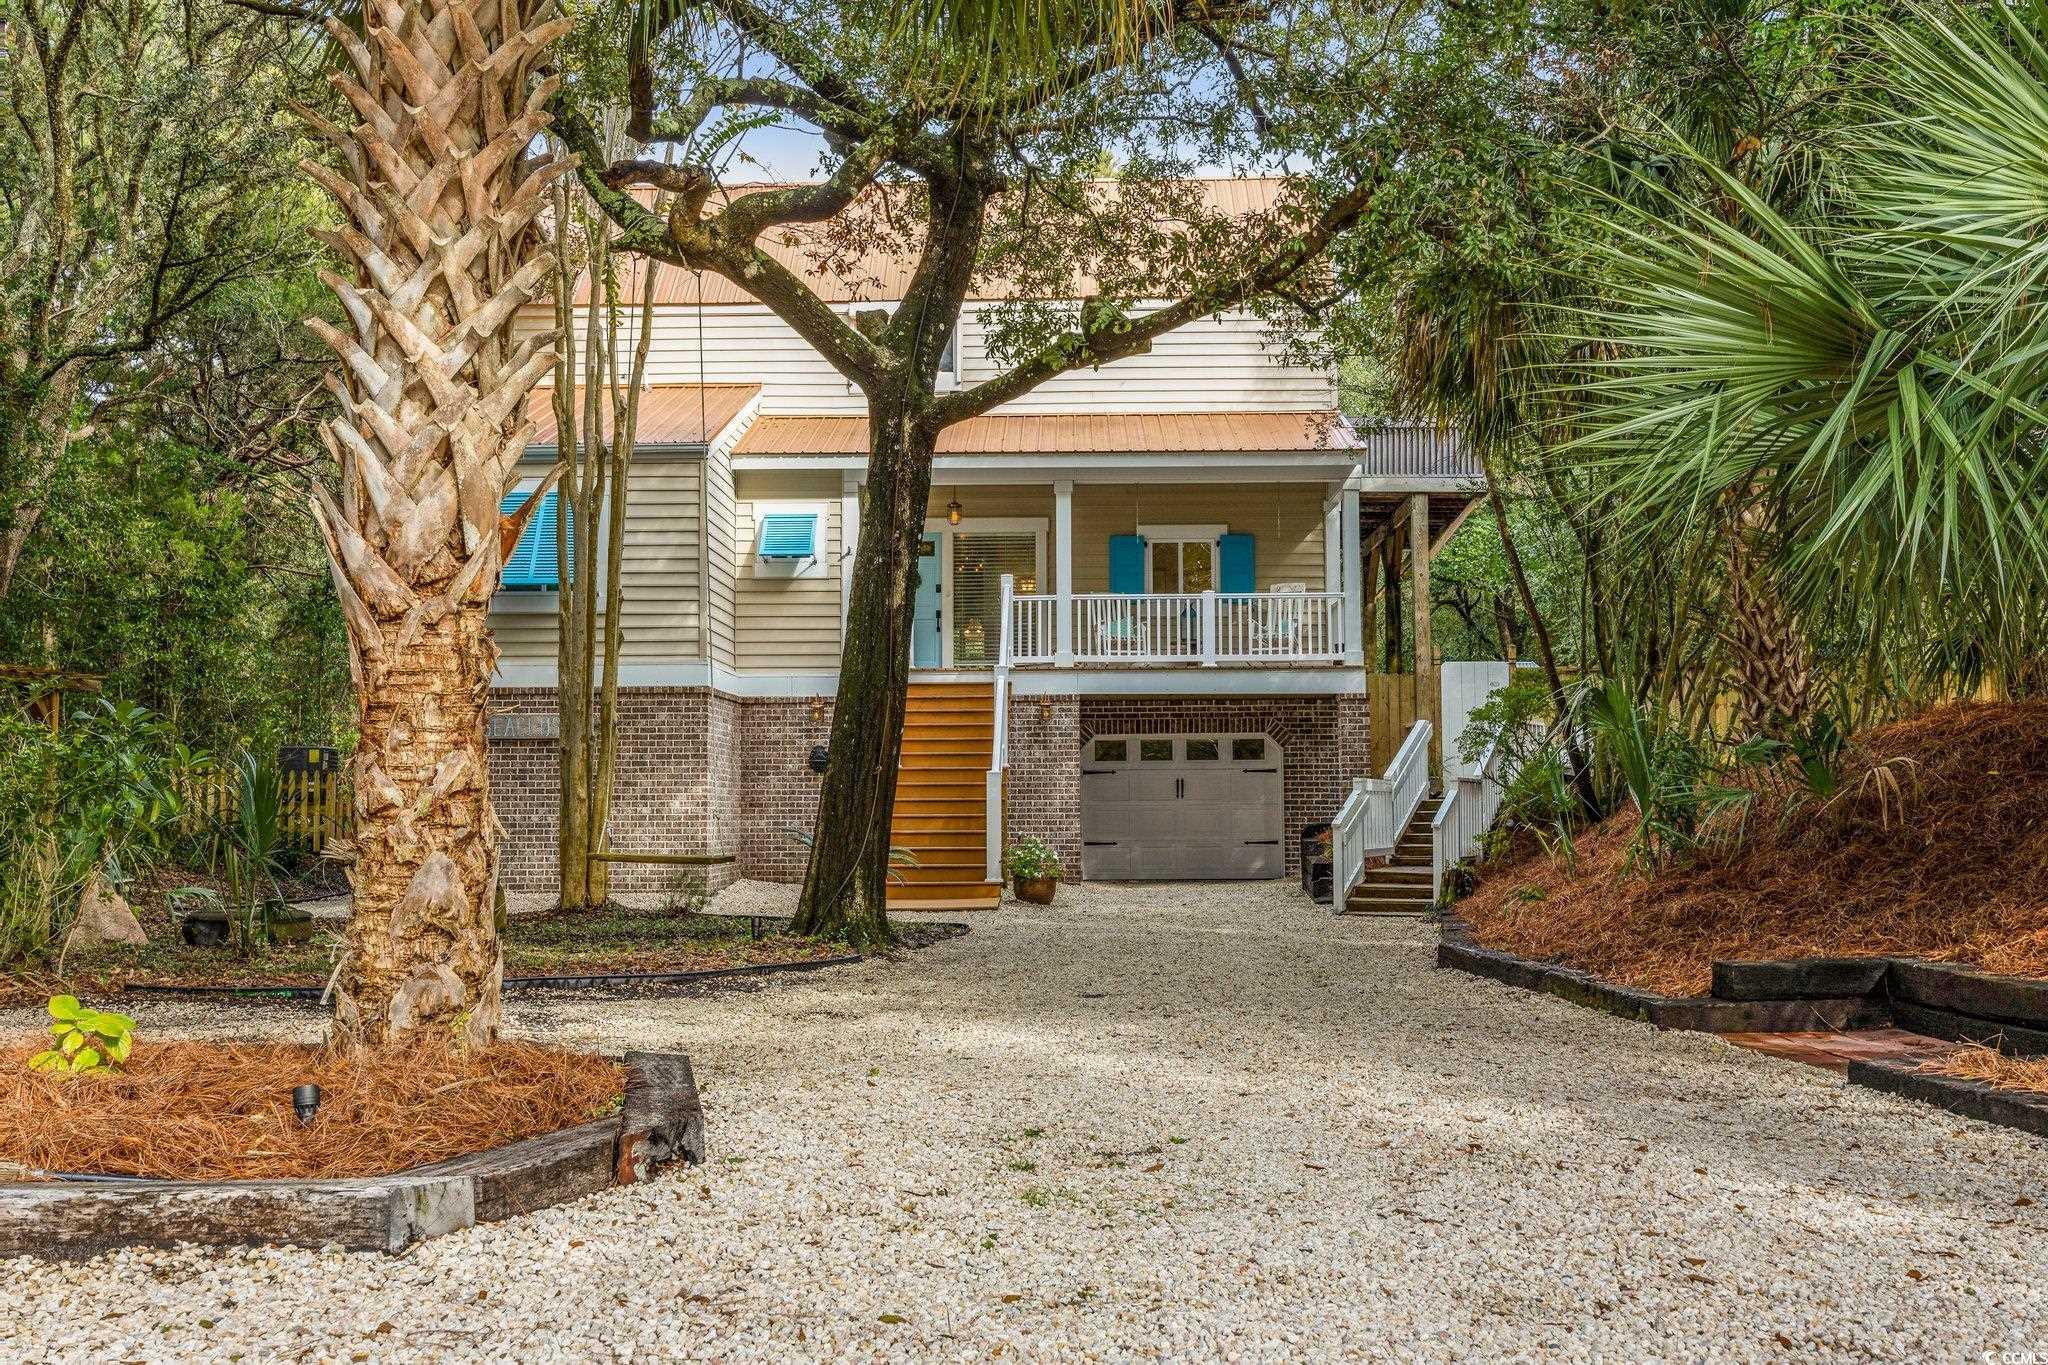 back on the market, due to no fault of the sellers!   private north litchfield beach oasis!  primary bath updated as of 4/1/24. listen to the waves from this spacious coastal home, just a short stroll to the beach.  this 6 bedroom, 5 full bathroom home sits on a half-acre lot that directly backs up to huntington beach state park.  there is plenty of privacy and space inside and out with an open floor concept ideal for entertaining.   with 3400 heated sq ft, this is the perfect beach home and yearlong retreat for families, entertaining guests, or a lucrative vacation rental investment.  location is key, and 245 windover dr delivers.  you will enjoy the best of coastal living without sacrificing the serenity of a quiet neighborhood.  current owners have made ample improvements to the property, come see this one of a kind of home for yourself!   pawleys island is located 30 minutes from myrtle beach attractions and a little over an hour to historic charleston.